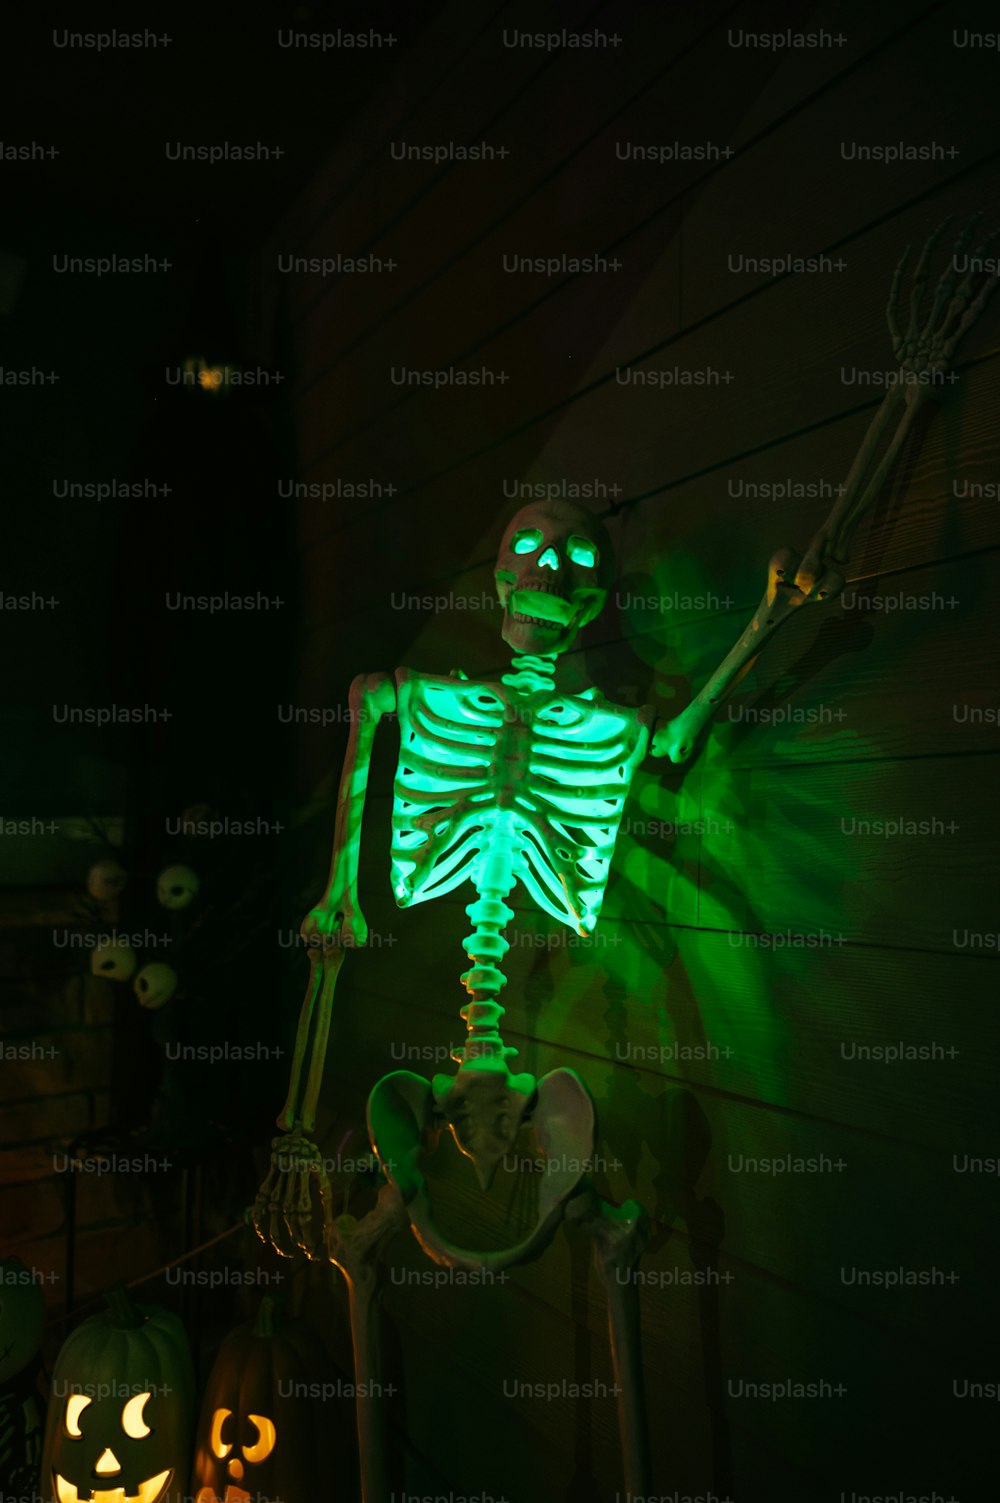 a skeleton with glowing eyes and arms holding a broom